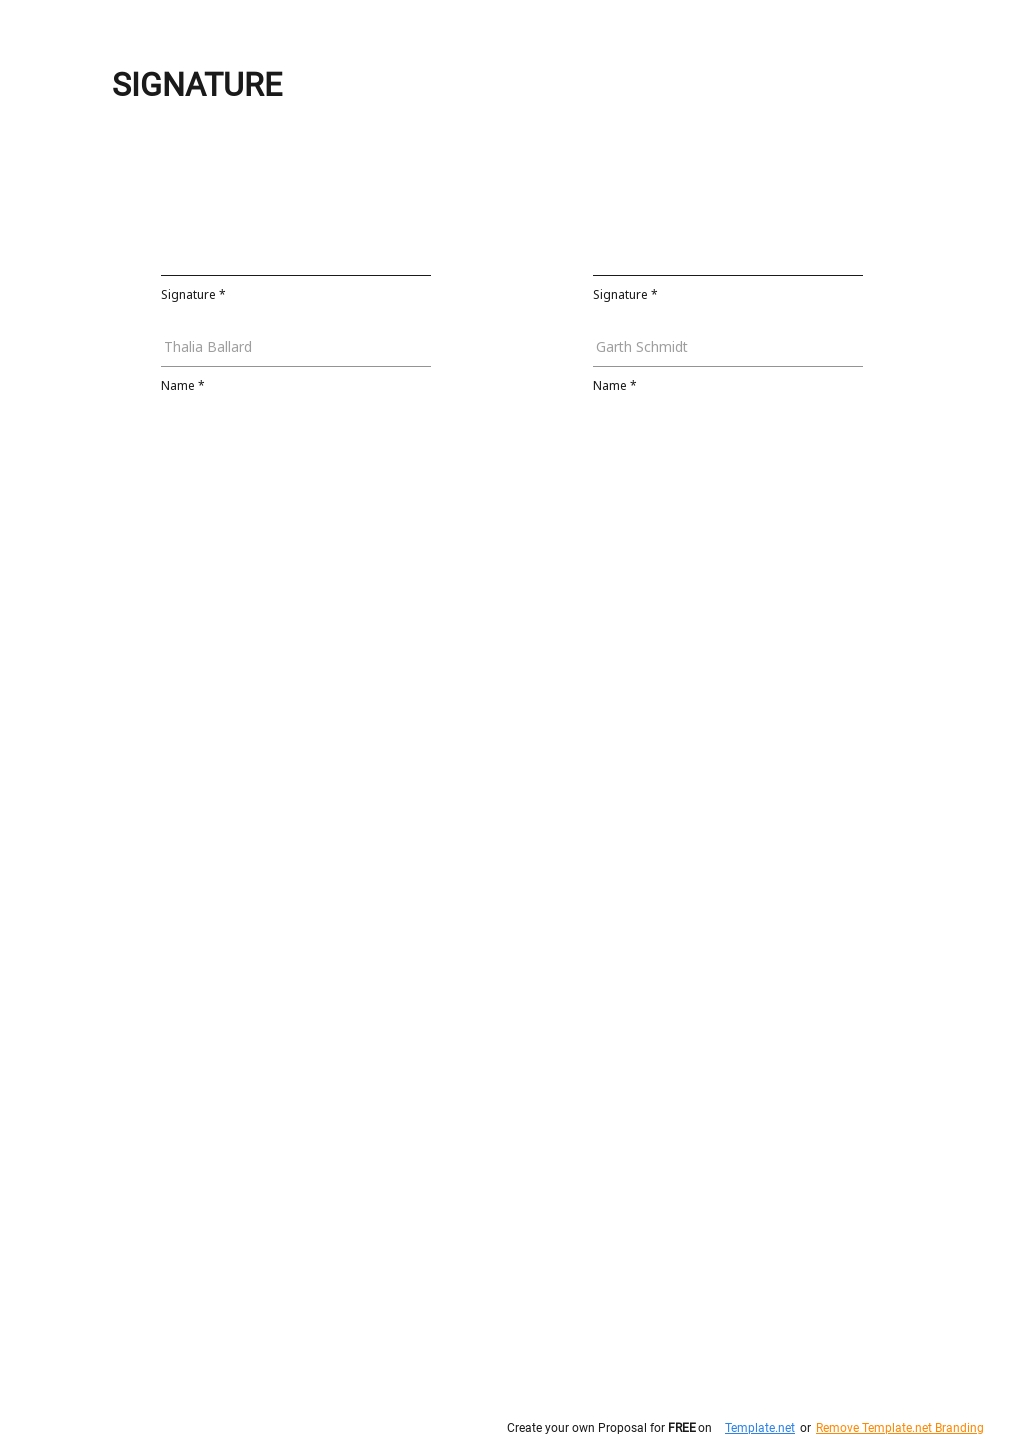 Sample Residential Real Estate Purchase Agreement Template 2.jpe